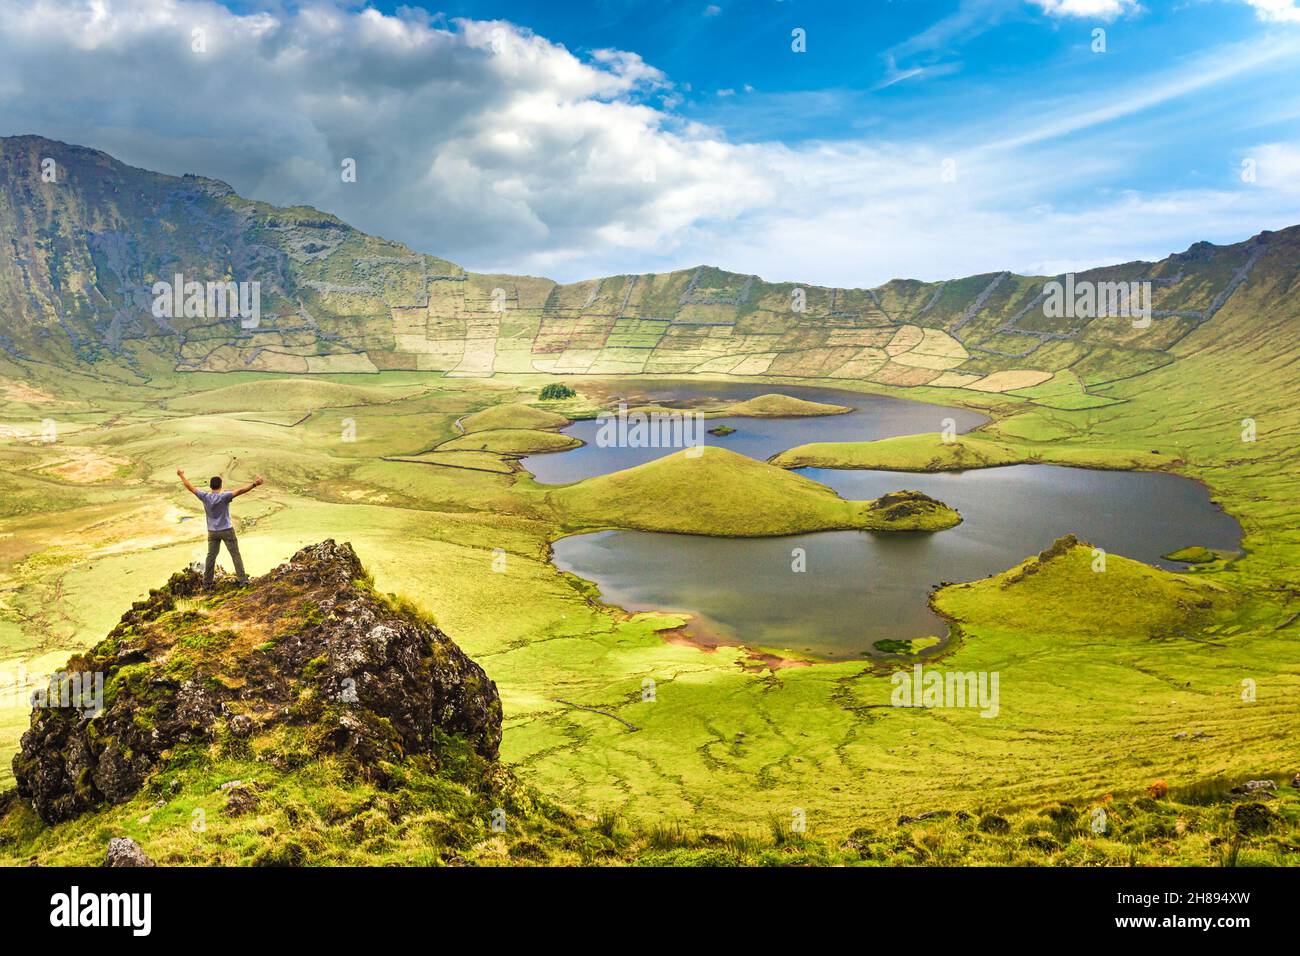 The landscape of Corvo Island in the Azores with man on rock peak with open arms. Concept of freedom and travel adventure. Stock Photo